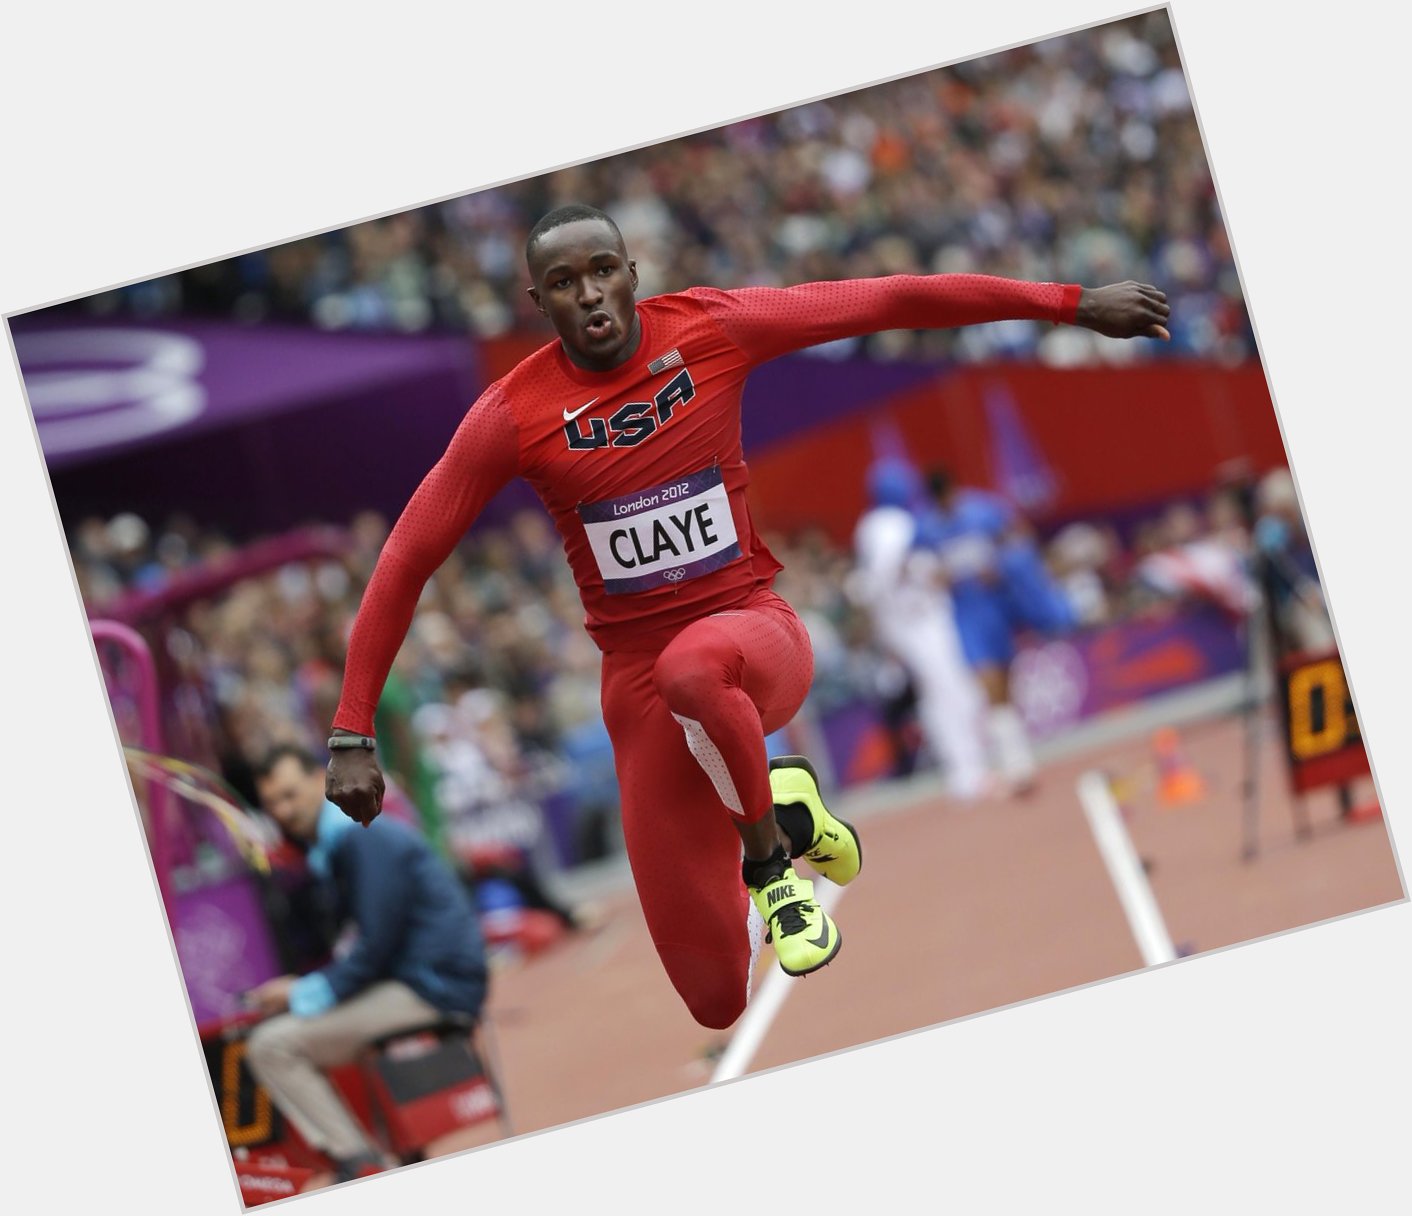 Happy 24th birthday to the one and only Will Claye! Congratulations 